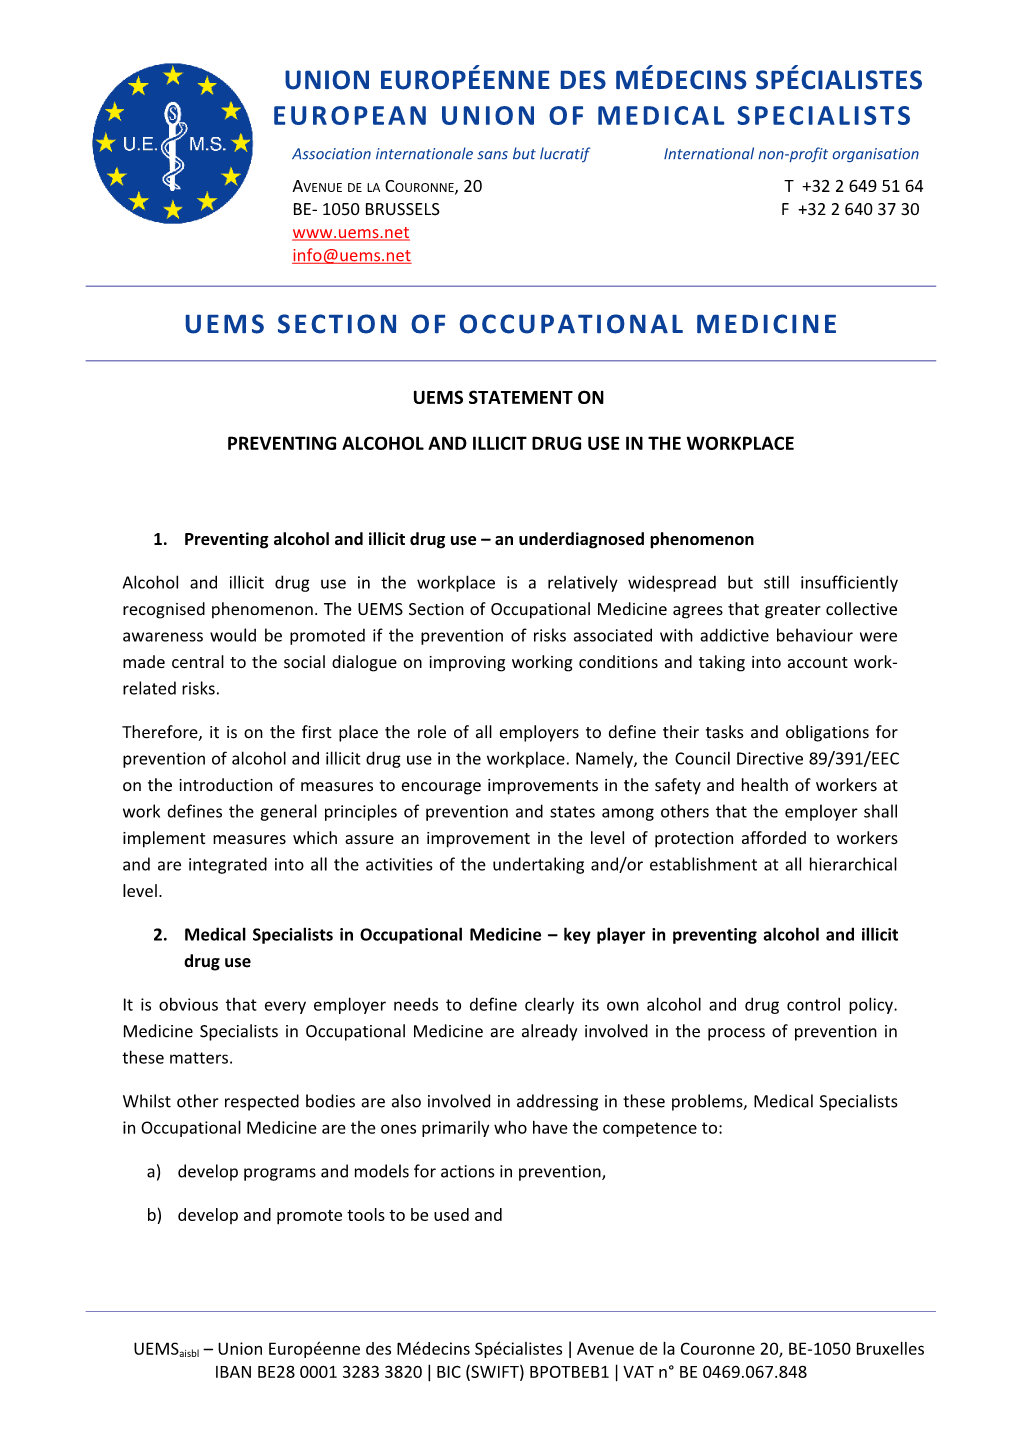 Statement of the Uems Section of Occupational Medicine on Preventing Alcohol and Drug (Ab)Use